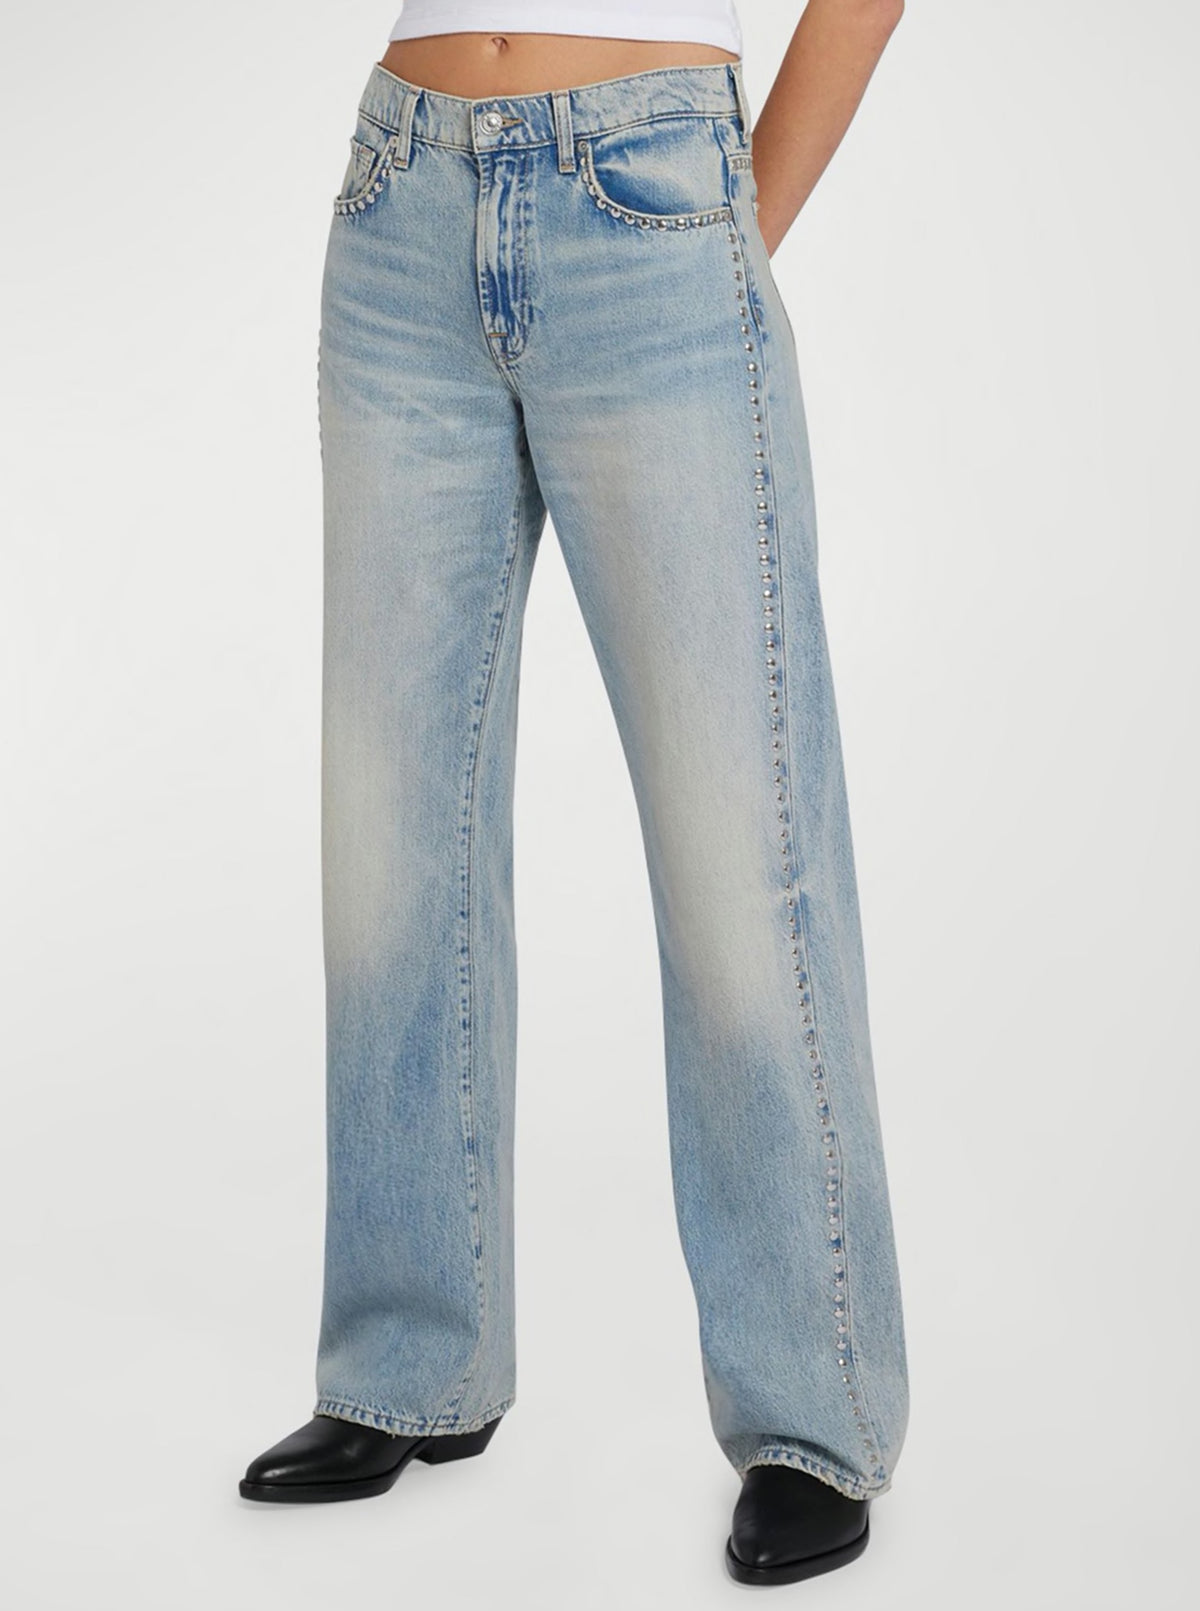 7 For All Mankind Tess Jean